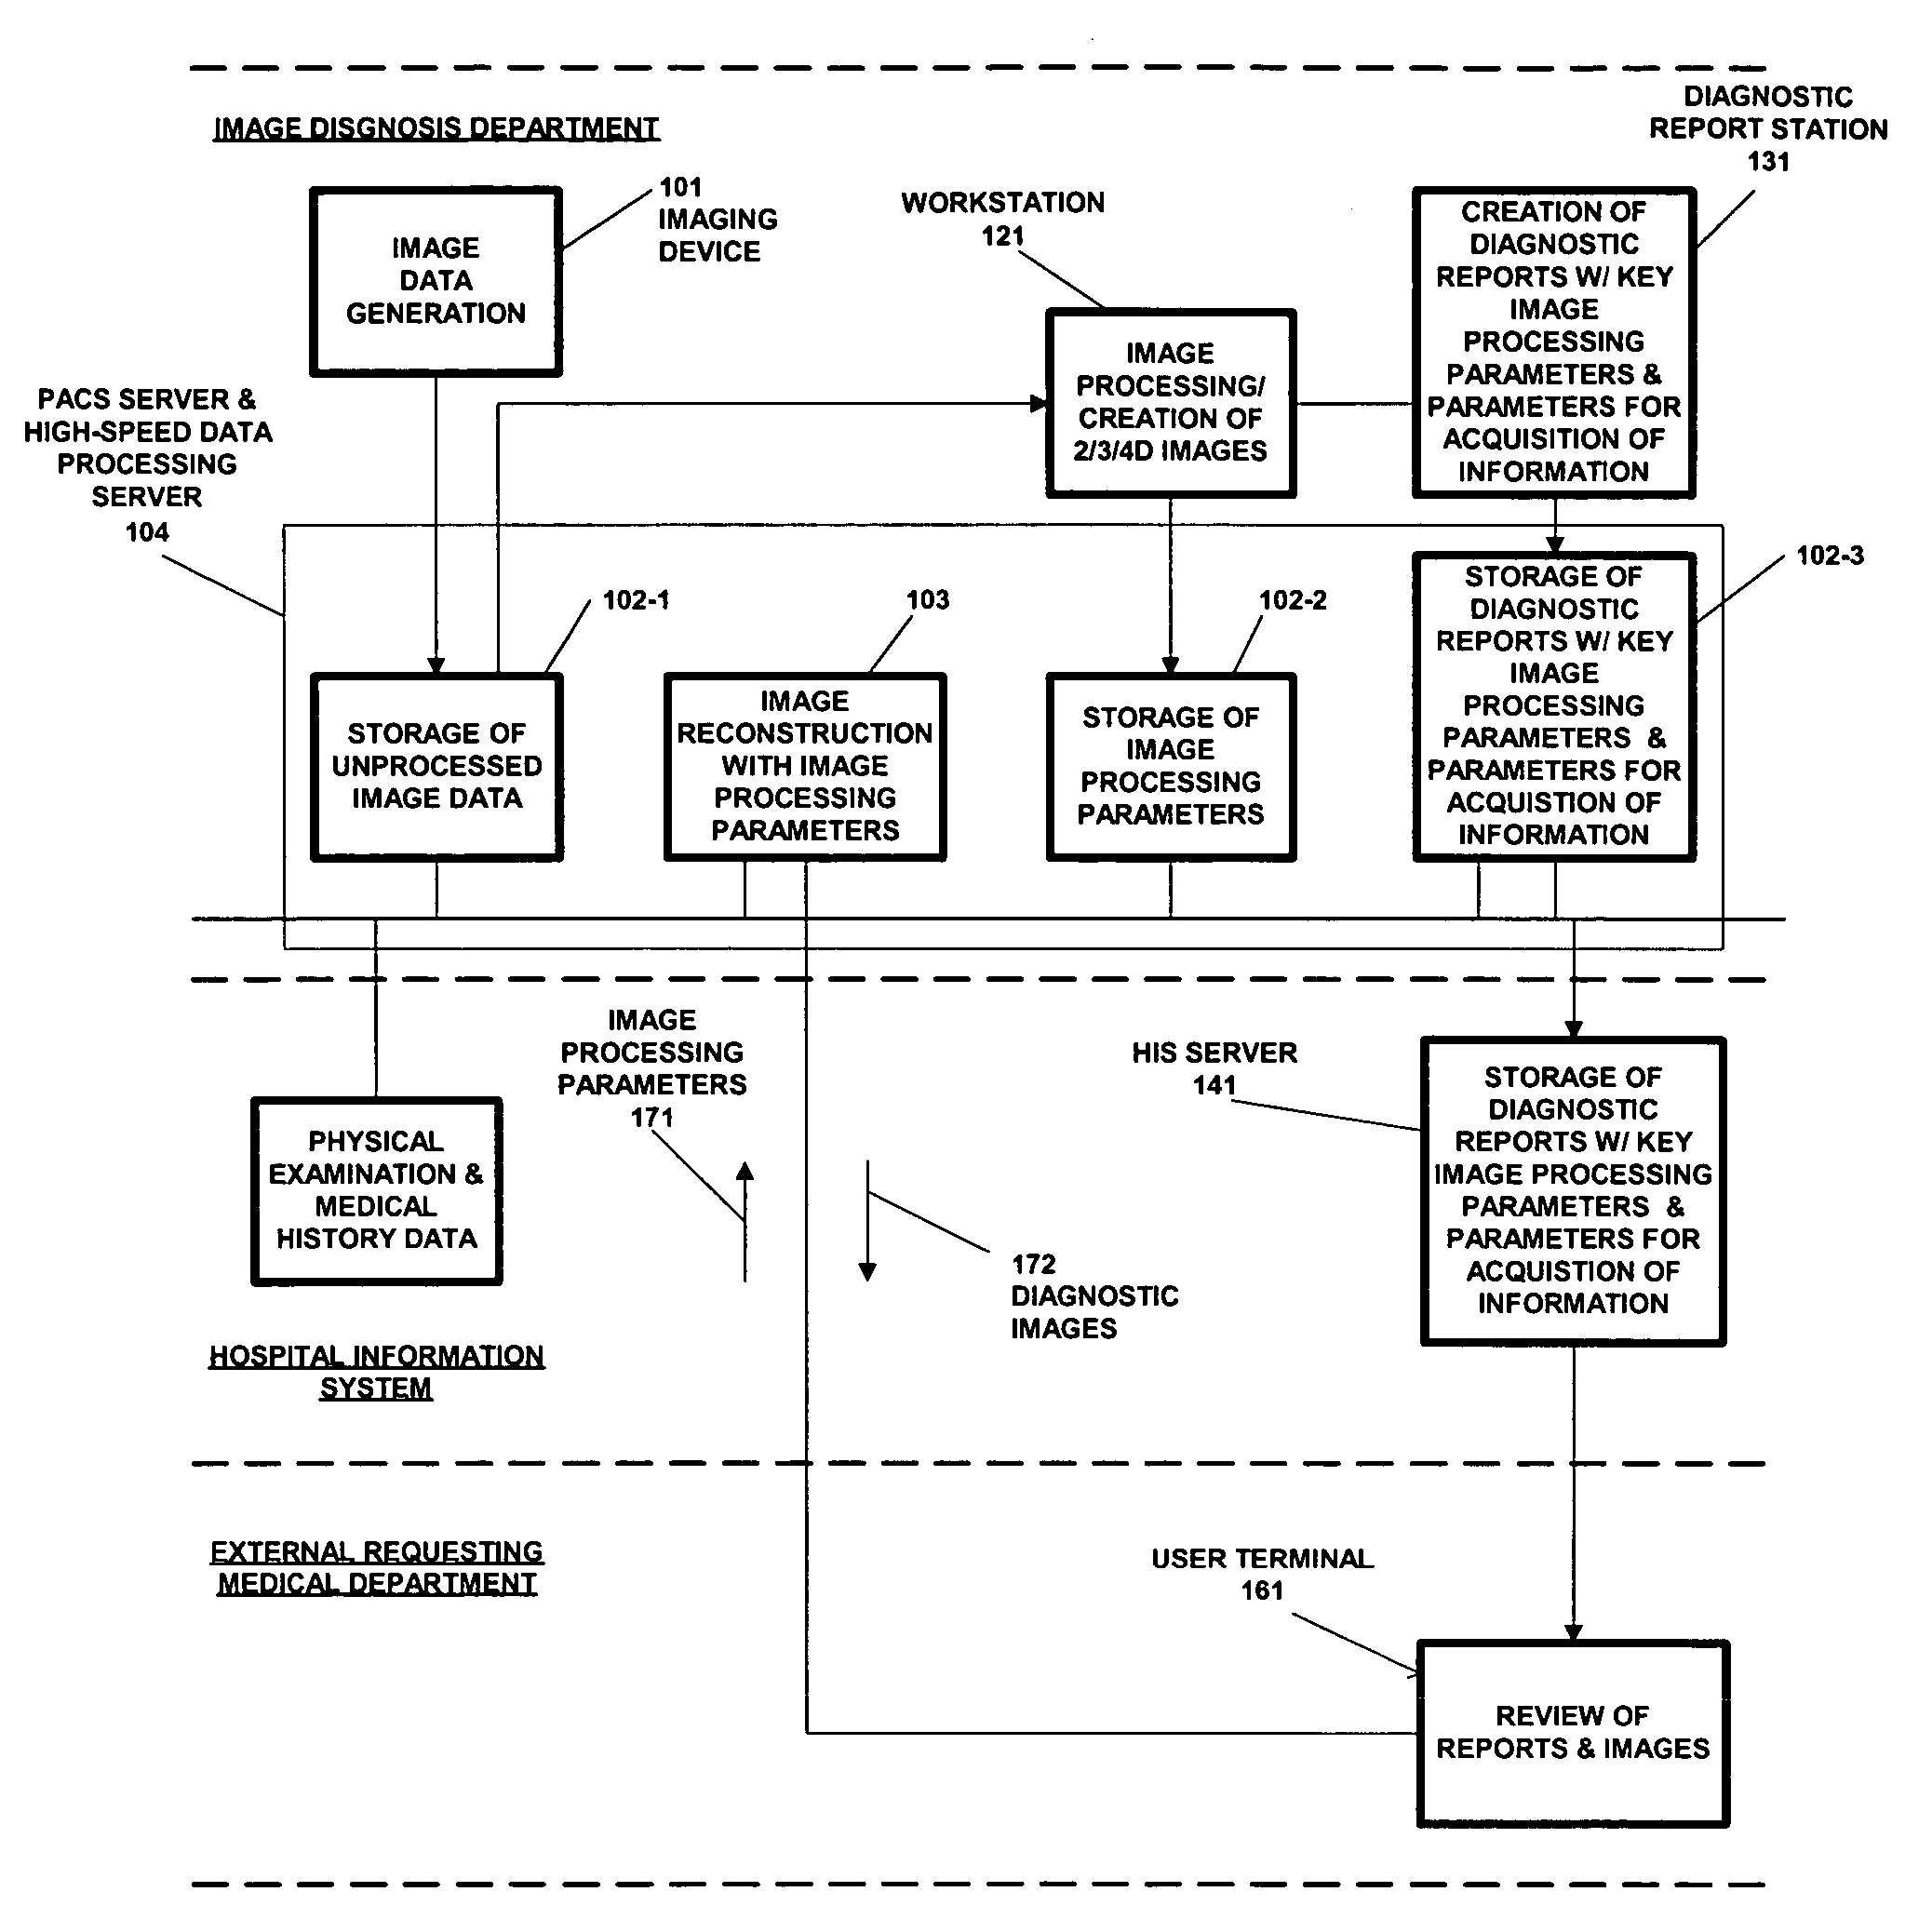 Reporting system in a networked environment